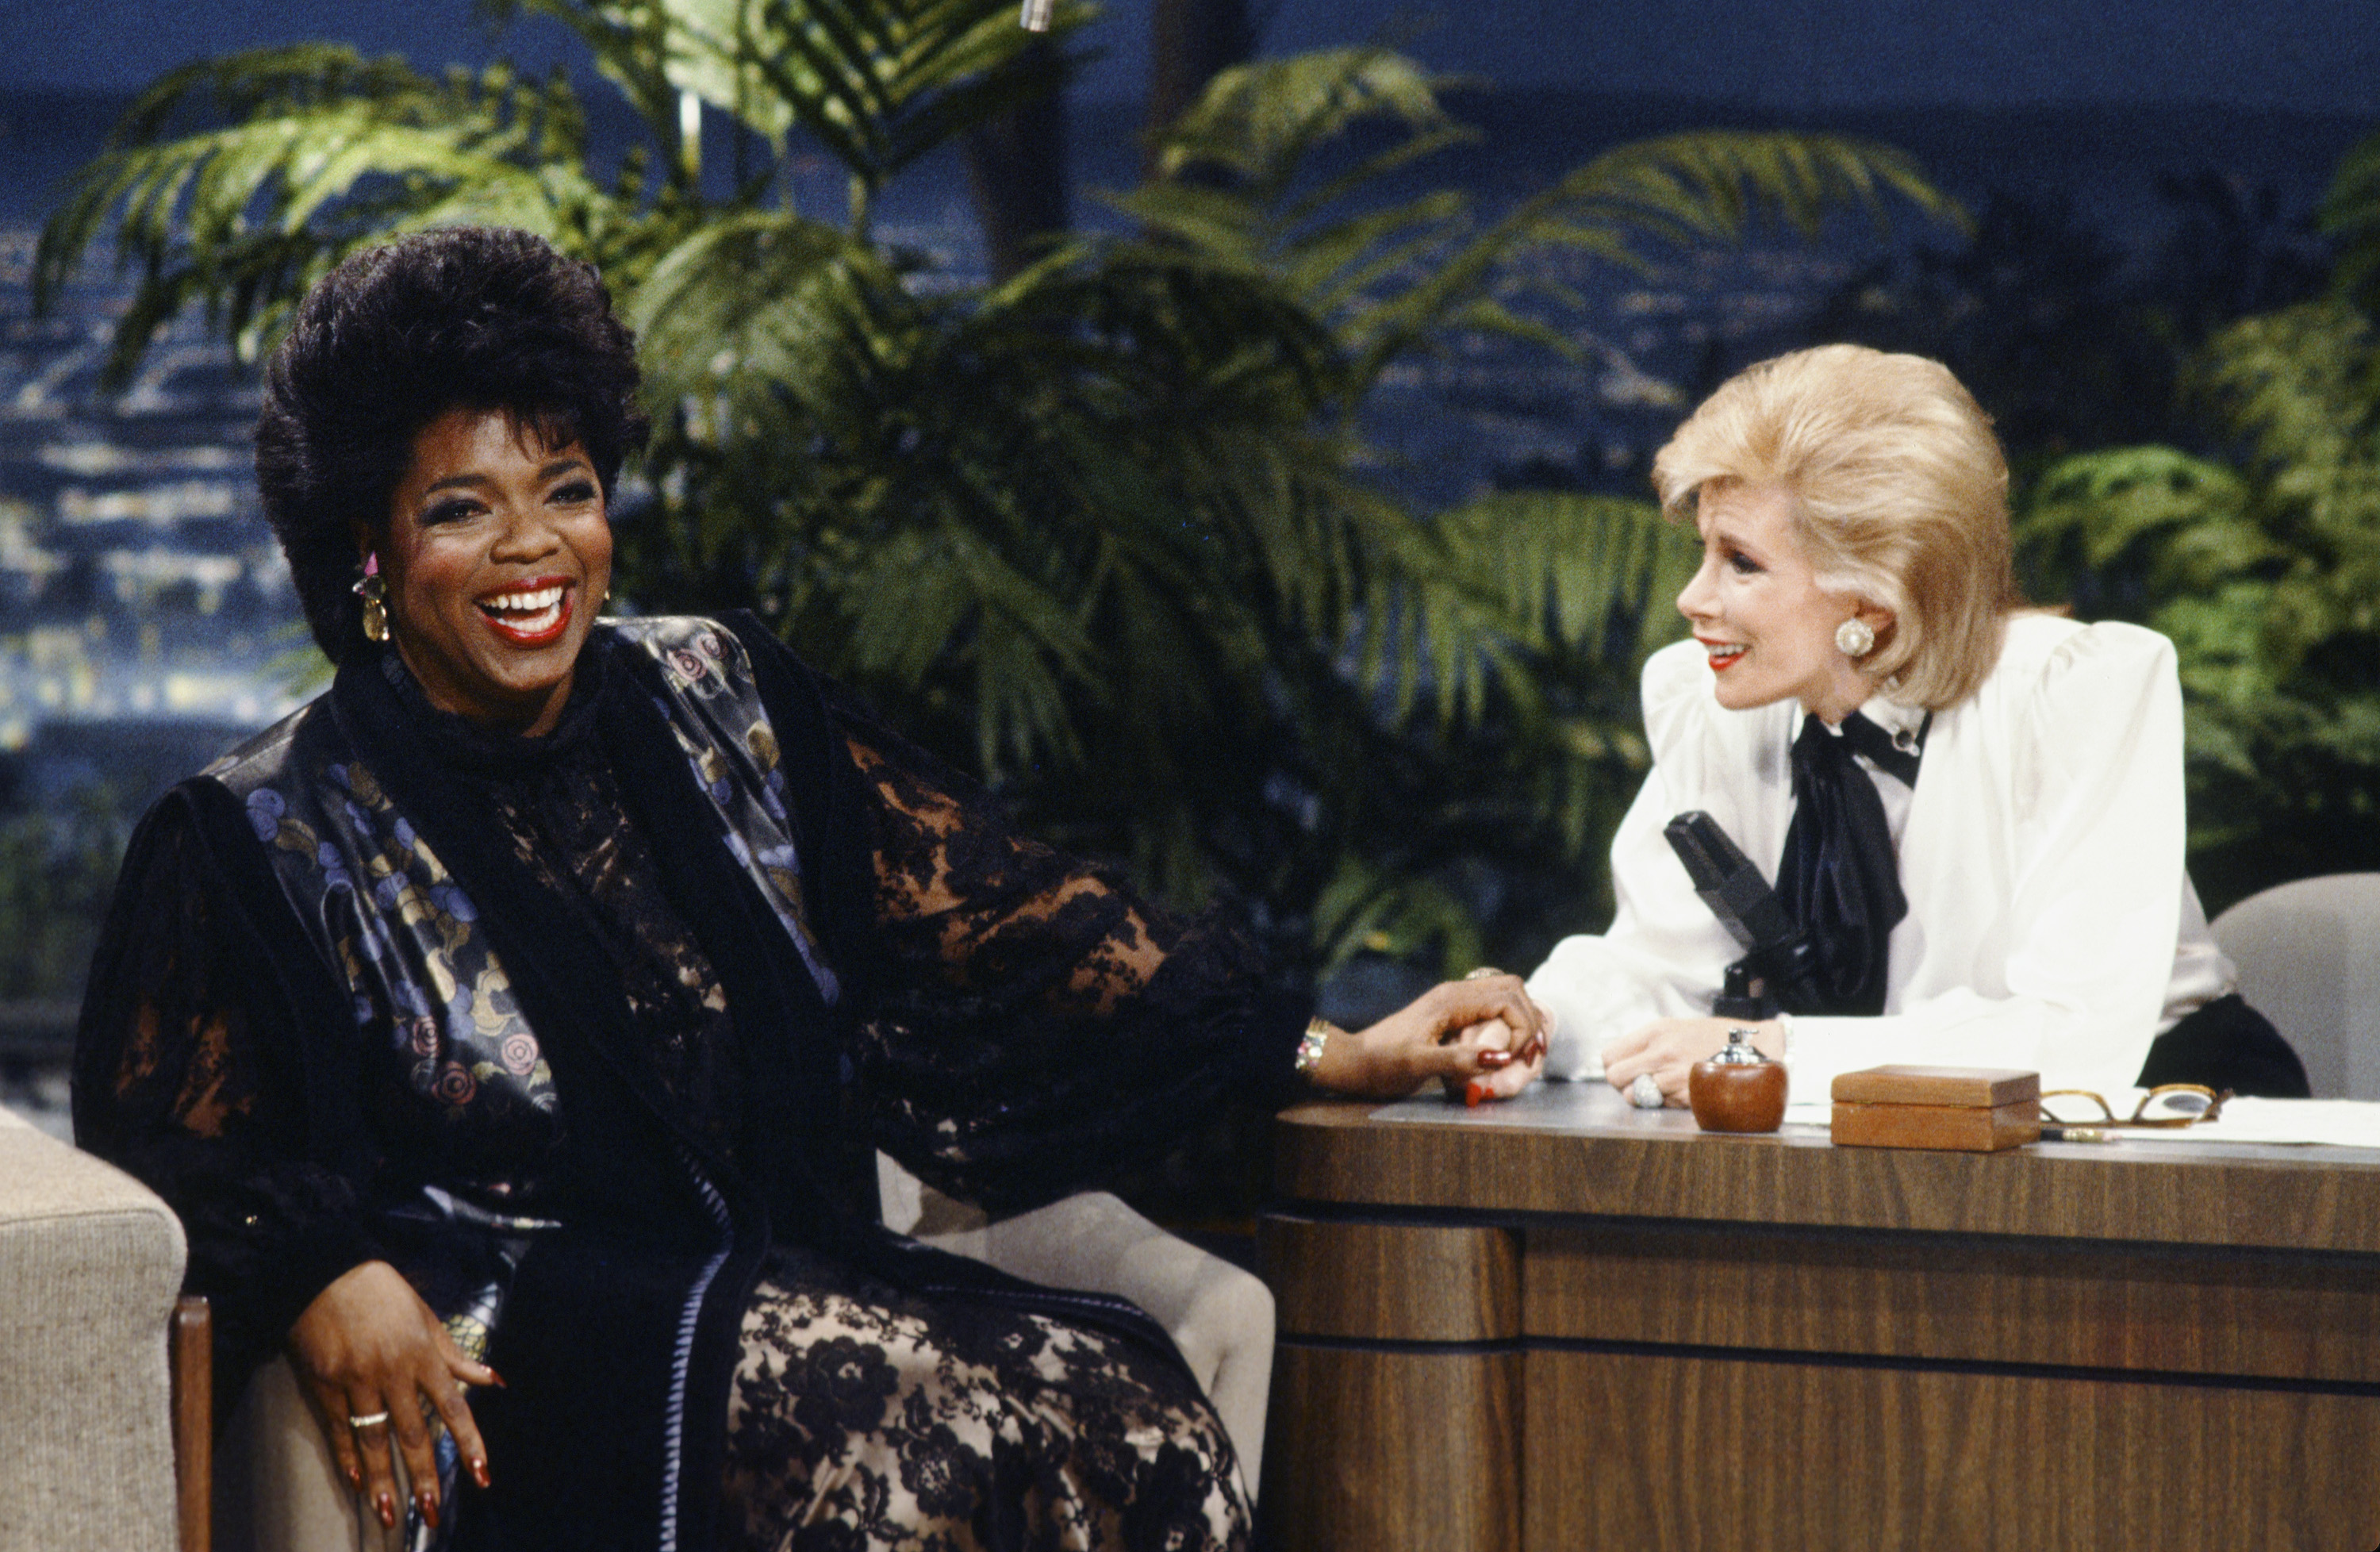 Talk show host Oprah Winfrey during an interview on "The Tonight Show Starring Johnny Carson" with guest host Joan Rivers on January 27, 1986. | Source: Getty Images